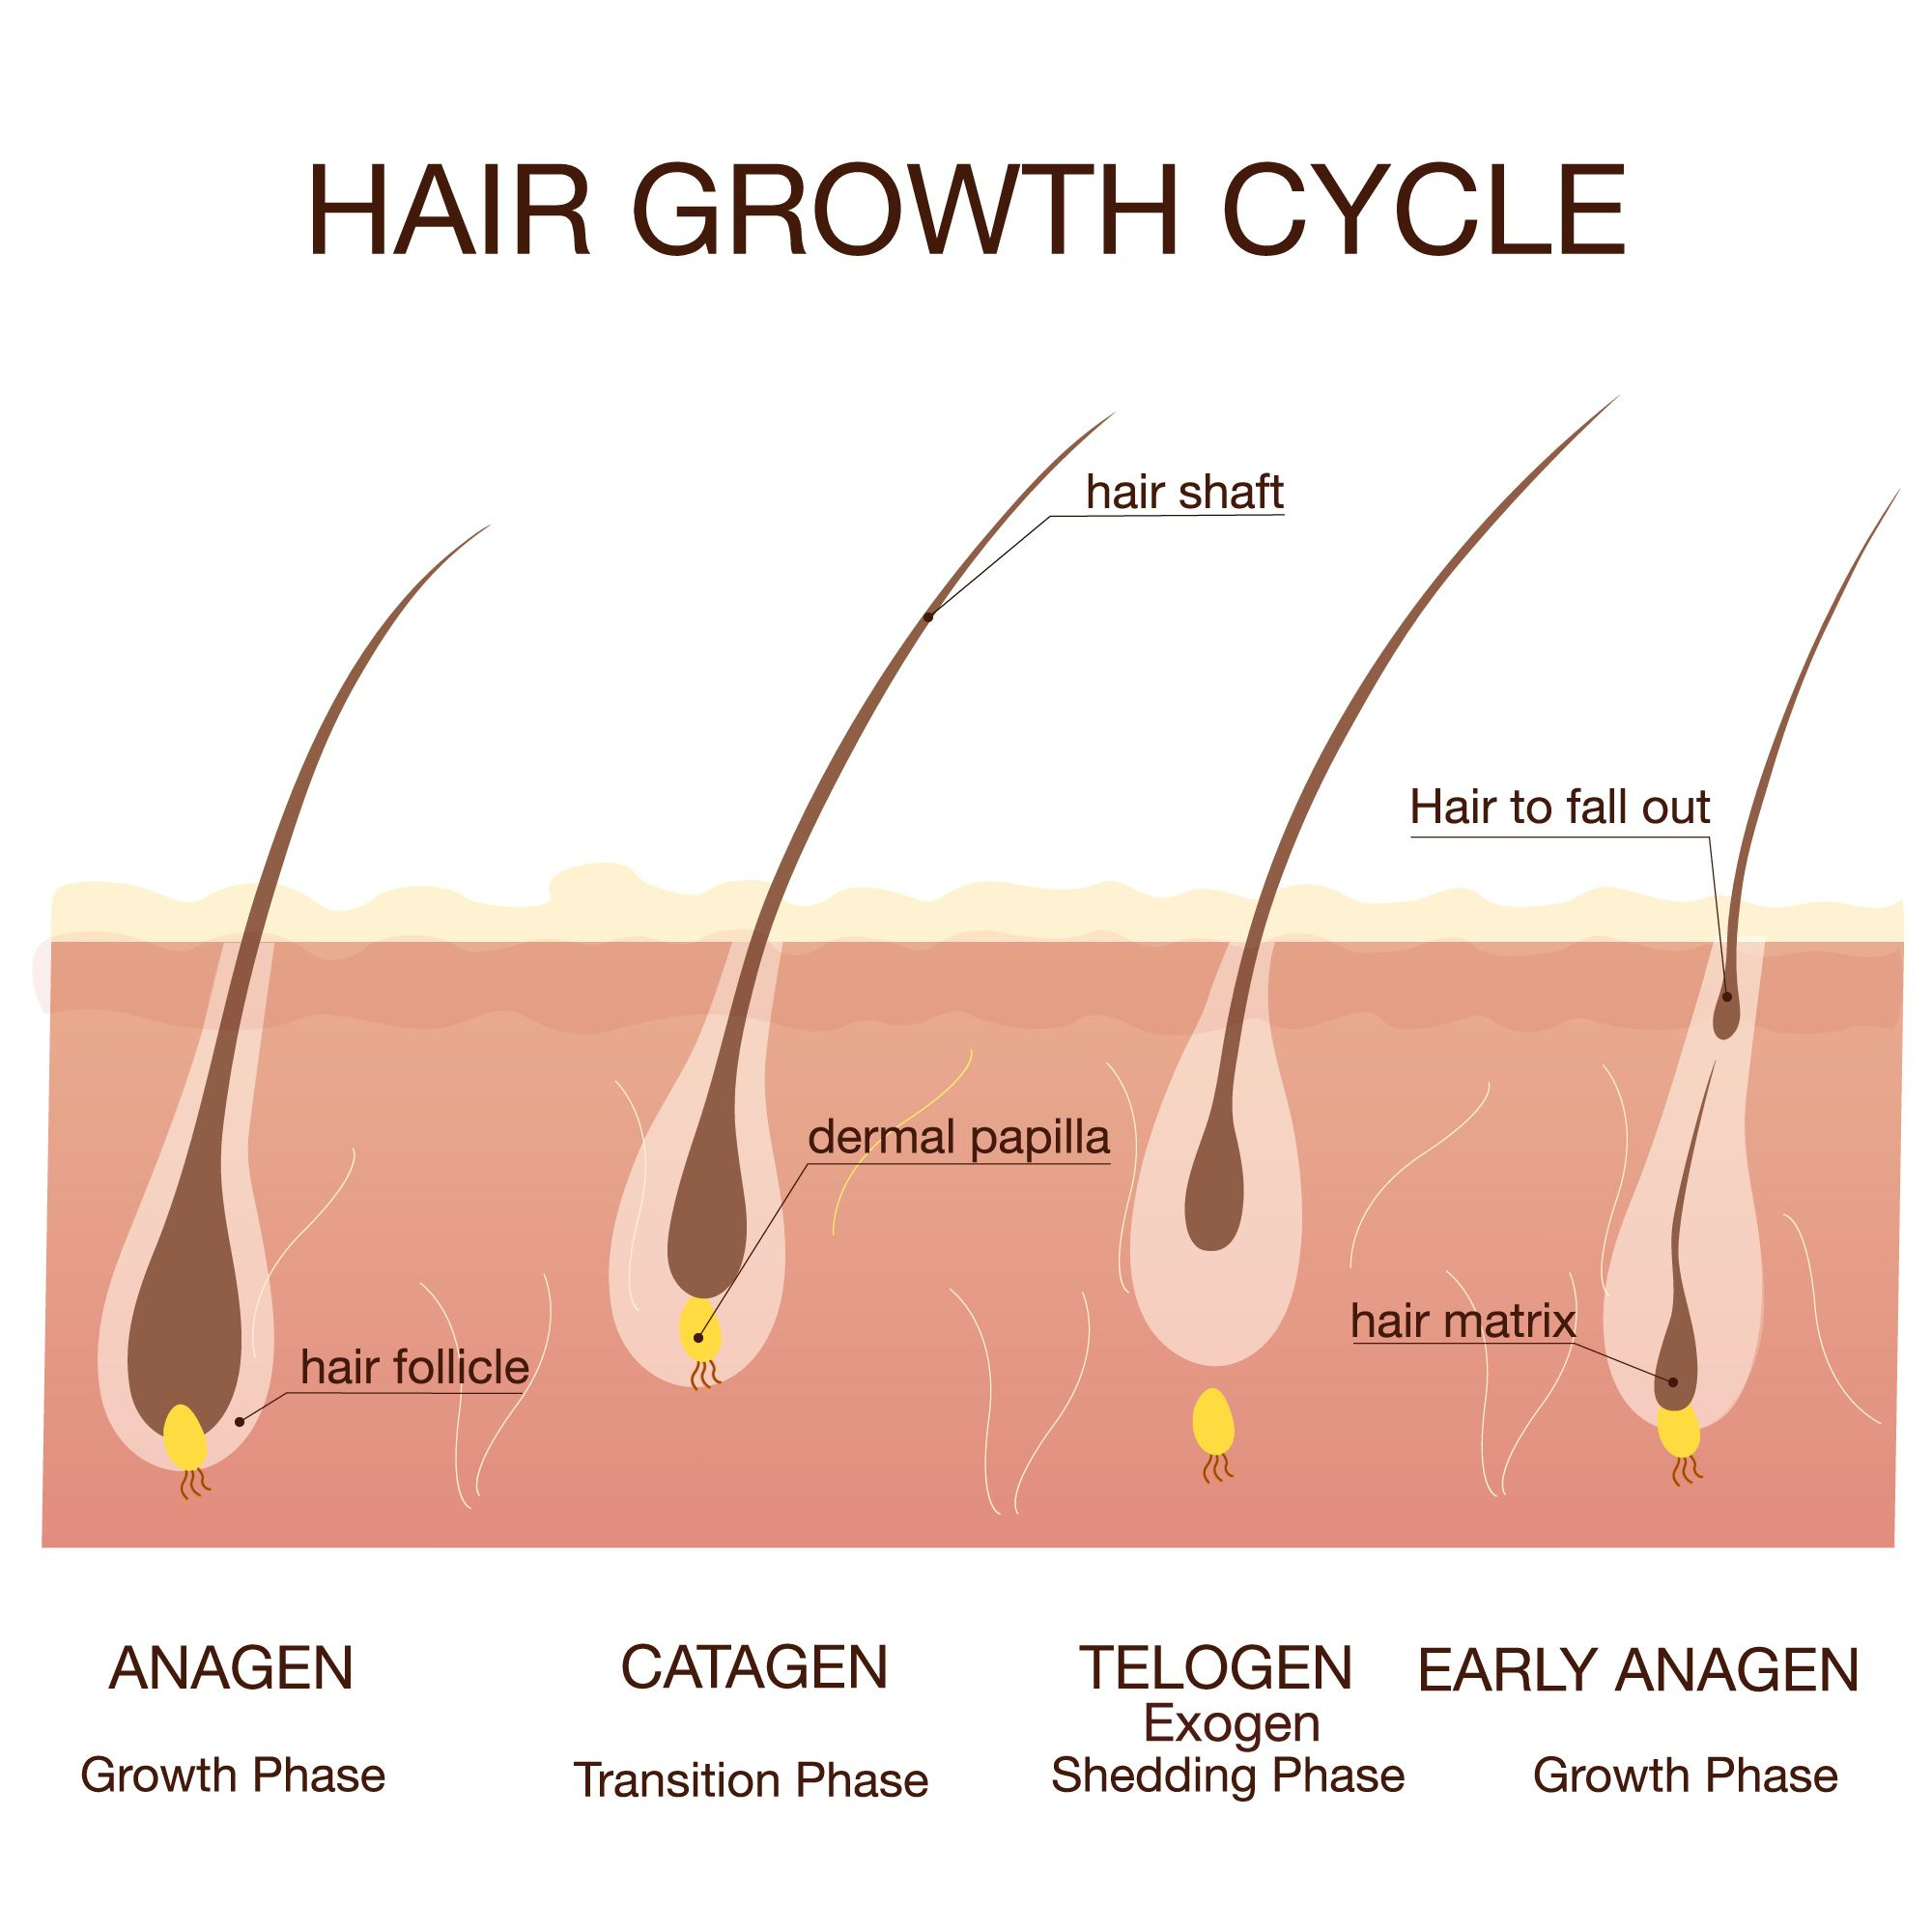 stages of the hair growth cycle